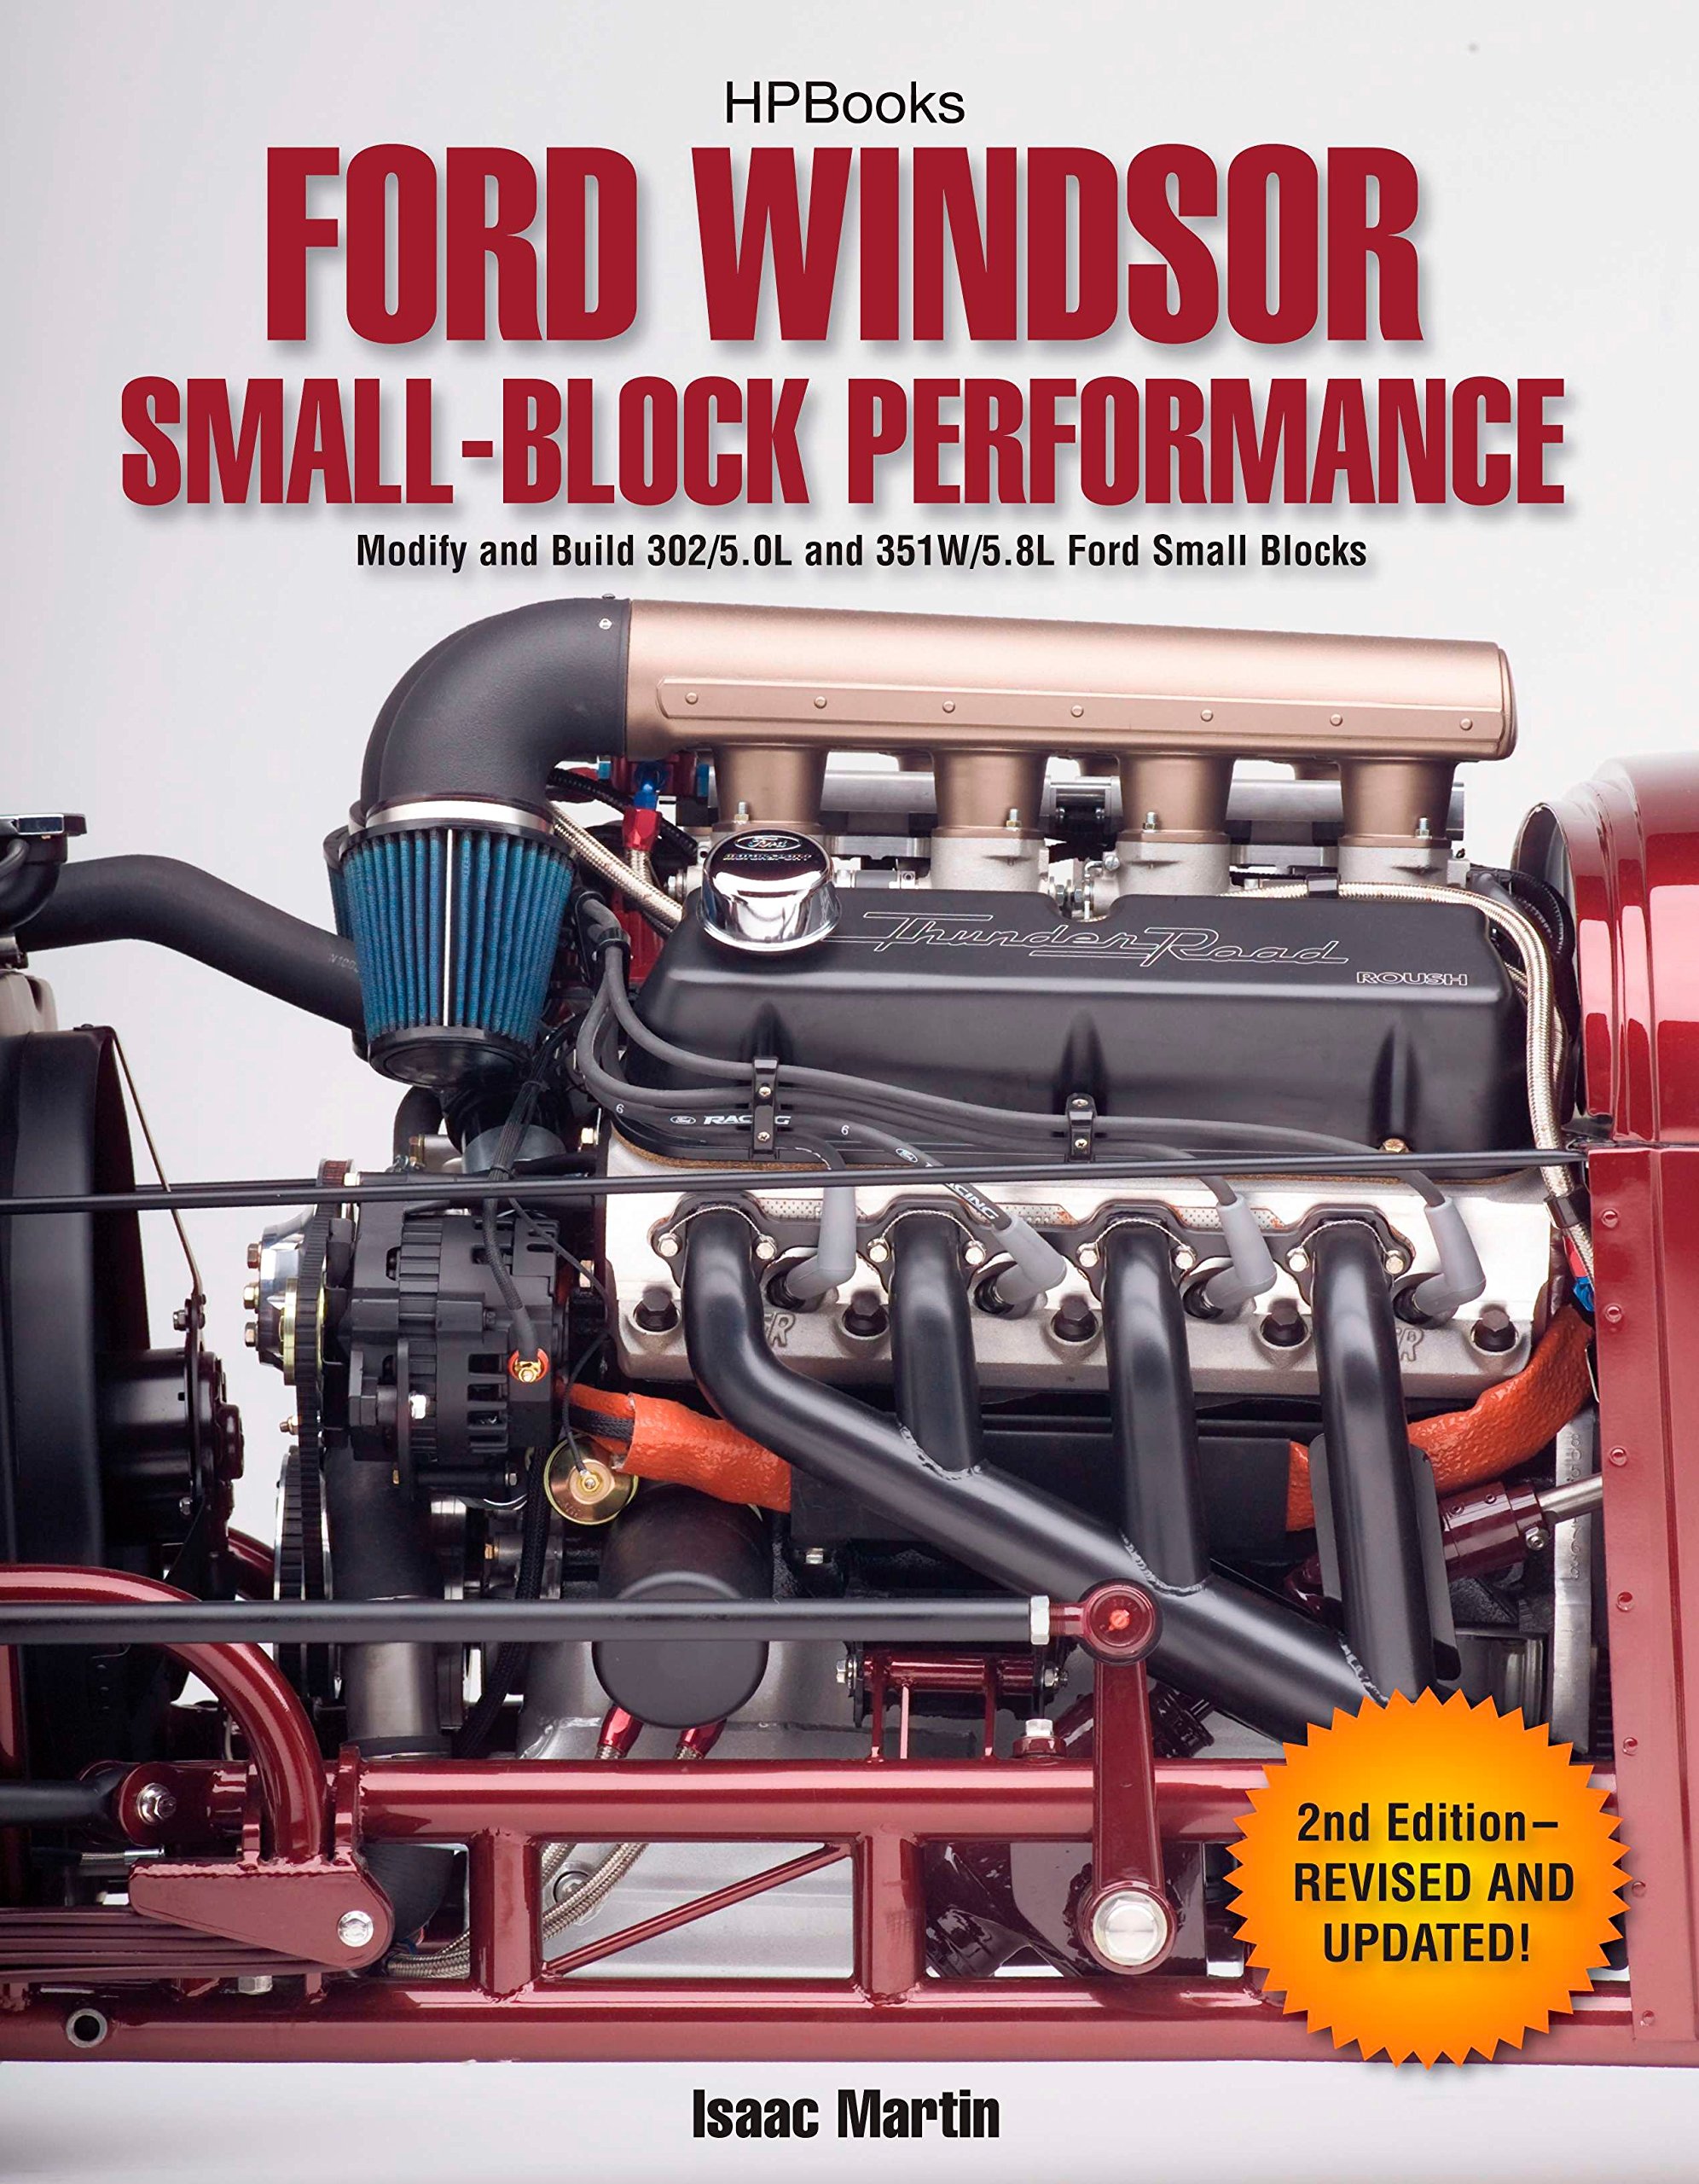 Book Cover Ford Windsor Small-Block Performance HP1558: Modify and Build 302/5.0L ND 351W/5.8L Ford Small Blocks